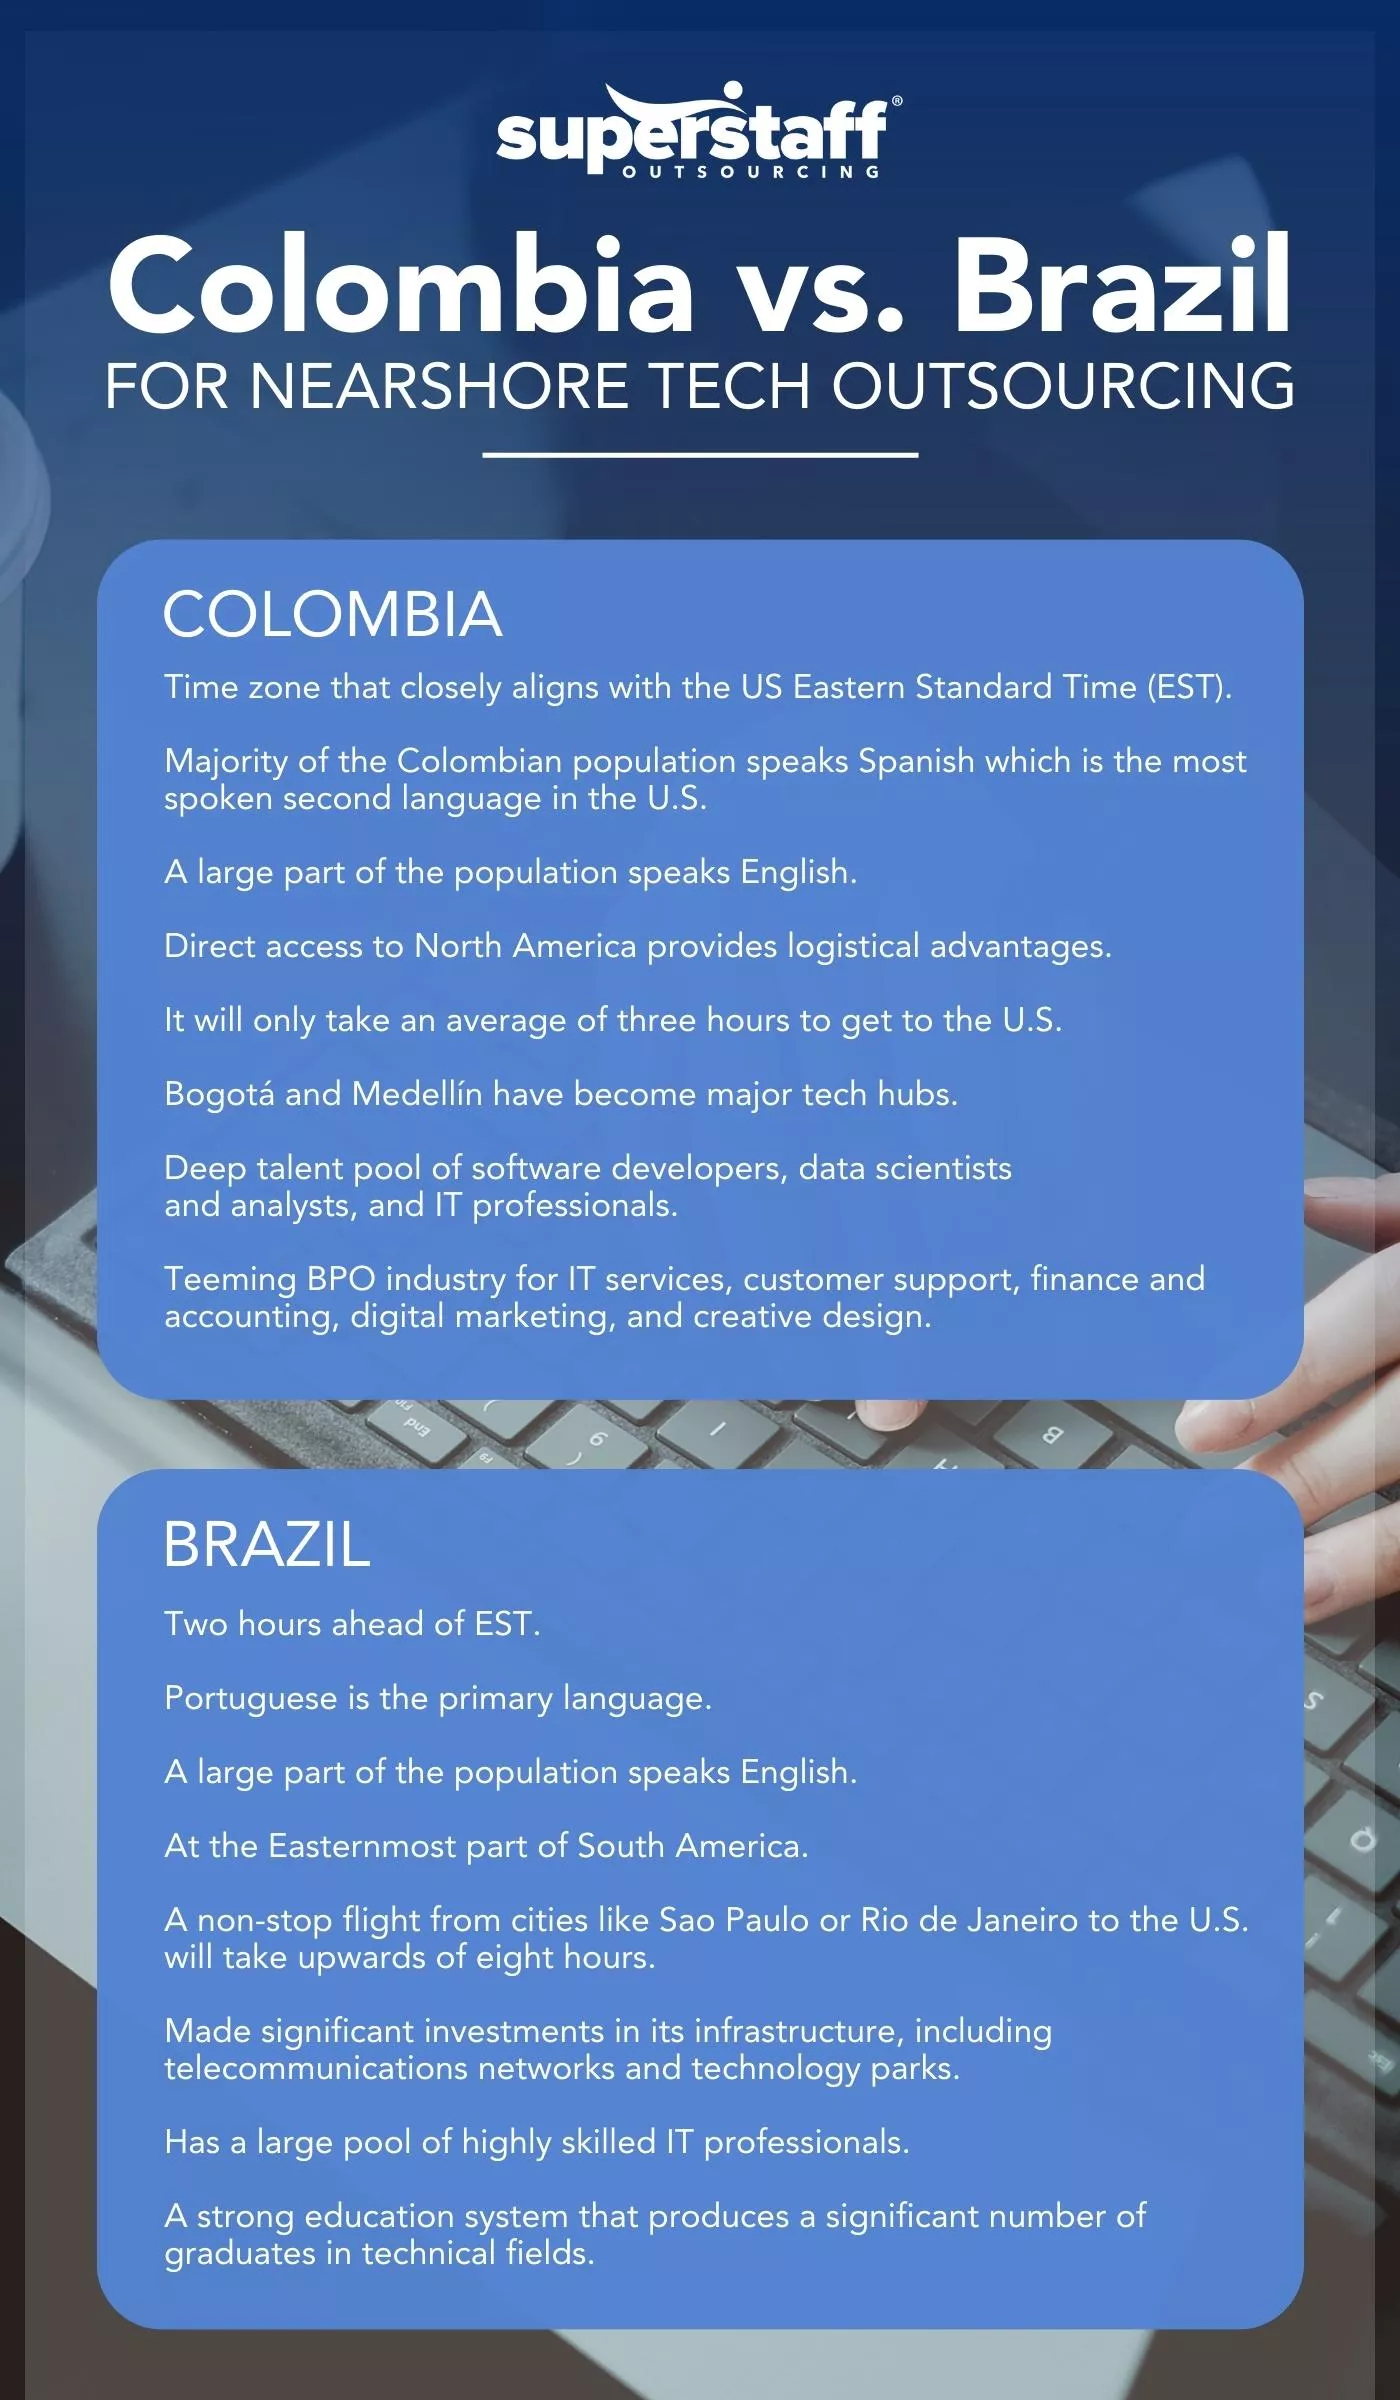 An infographic shows comparison of Colombia vs Brazil for Nearshore Tech Outsourcing.